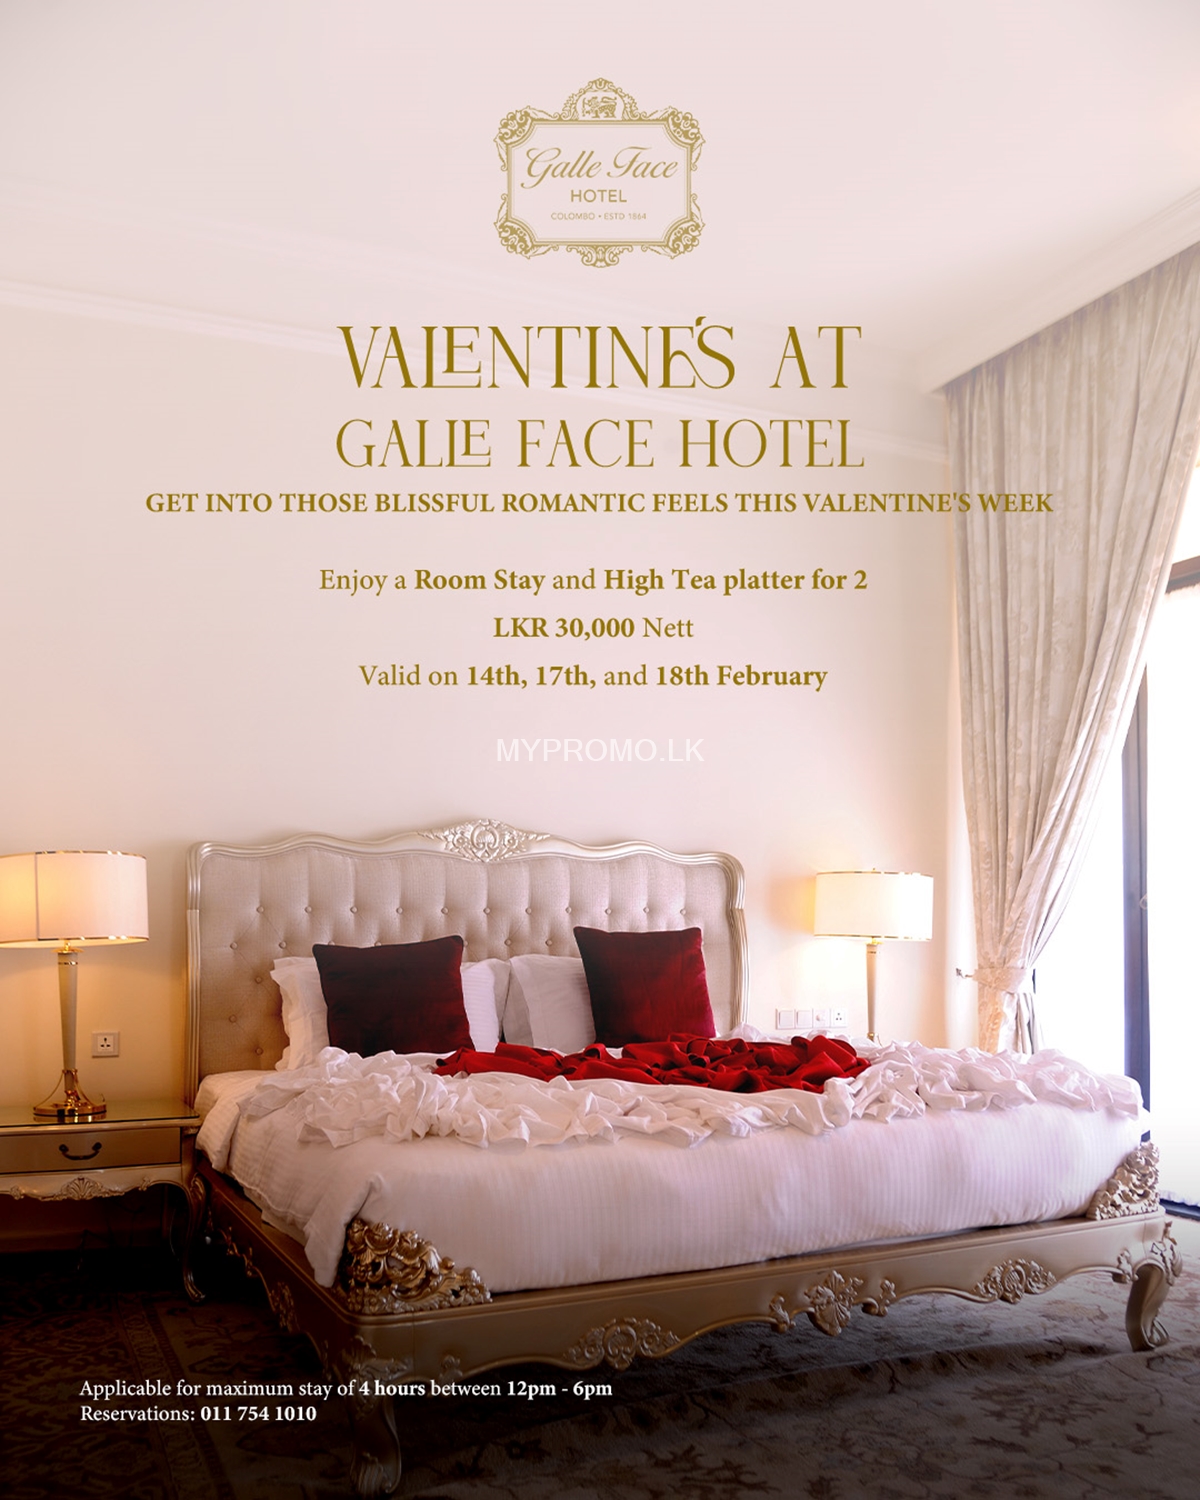 Valentine's at Galle Face Hotel